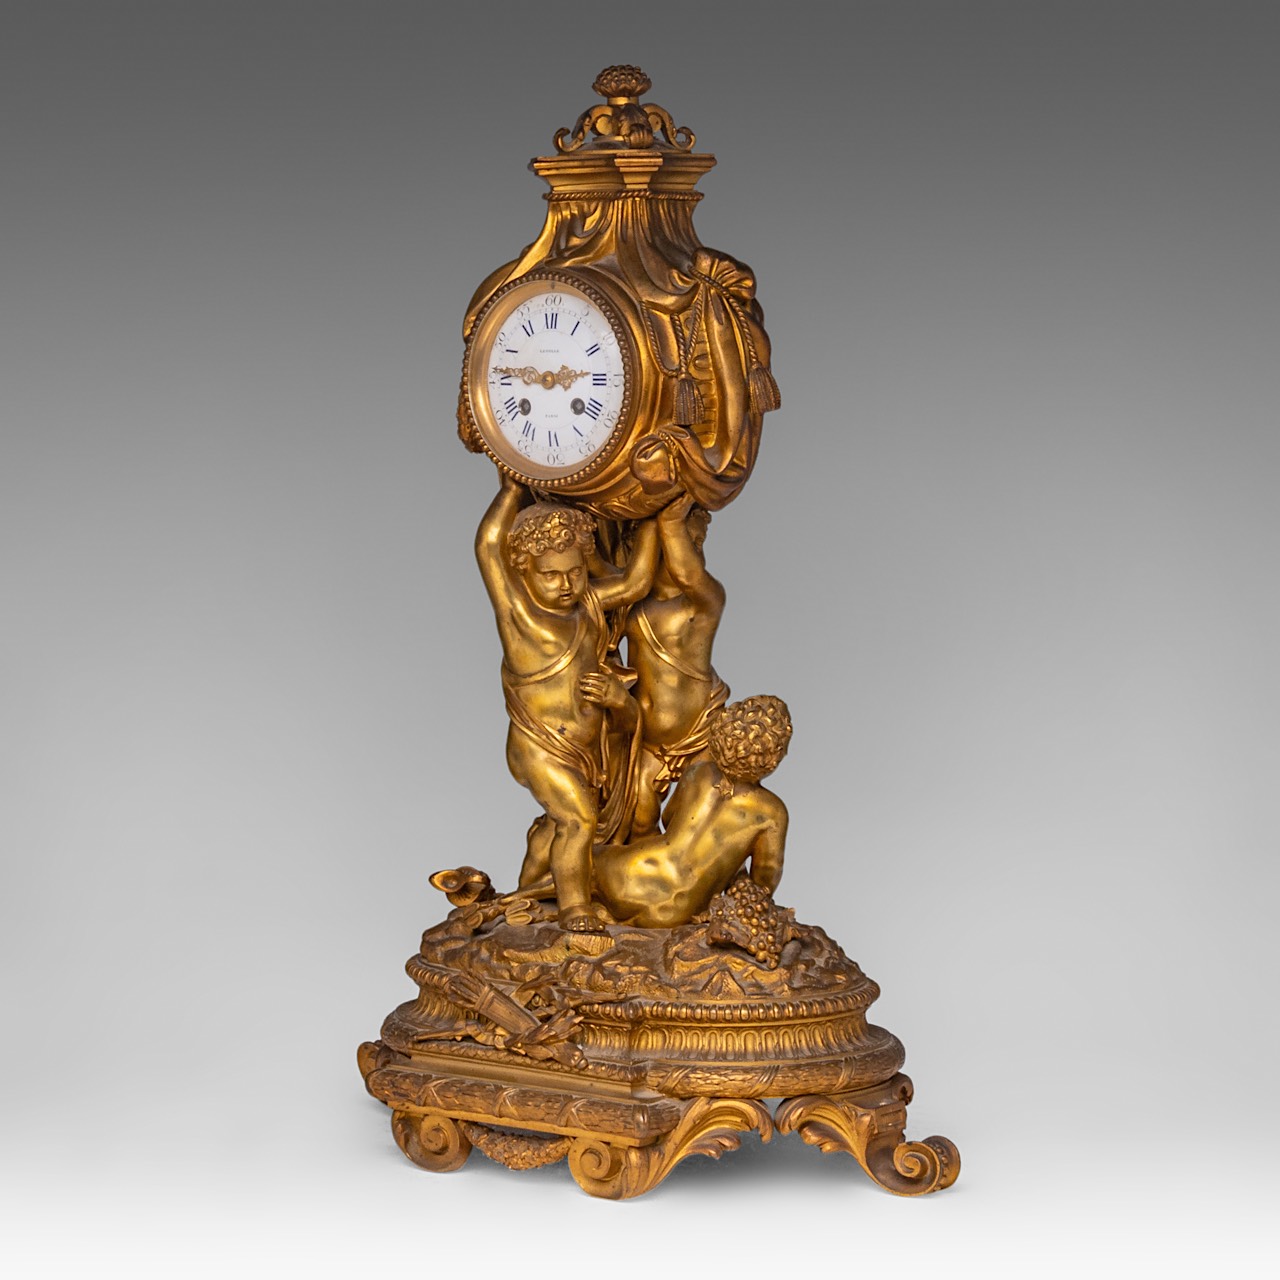 A Neoclassical gilt bronze mantle clock with putti holding the clock case, Lerolle, Paris, H 61 cm - Image 2 of 7